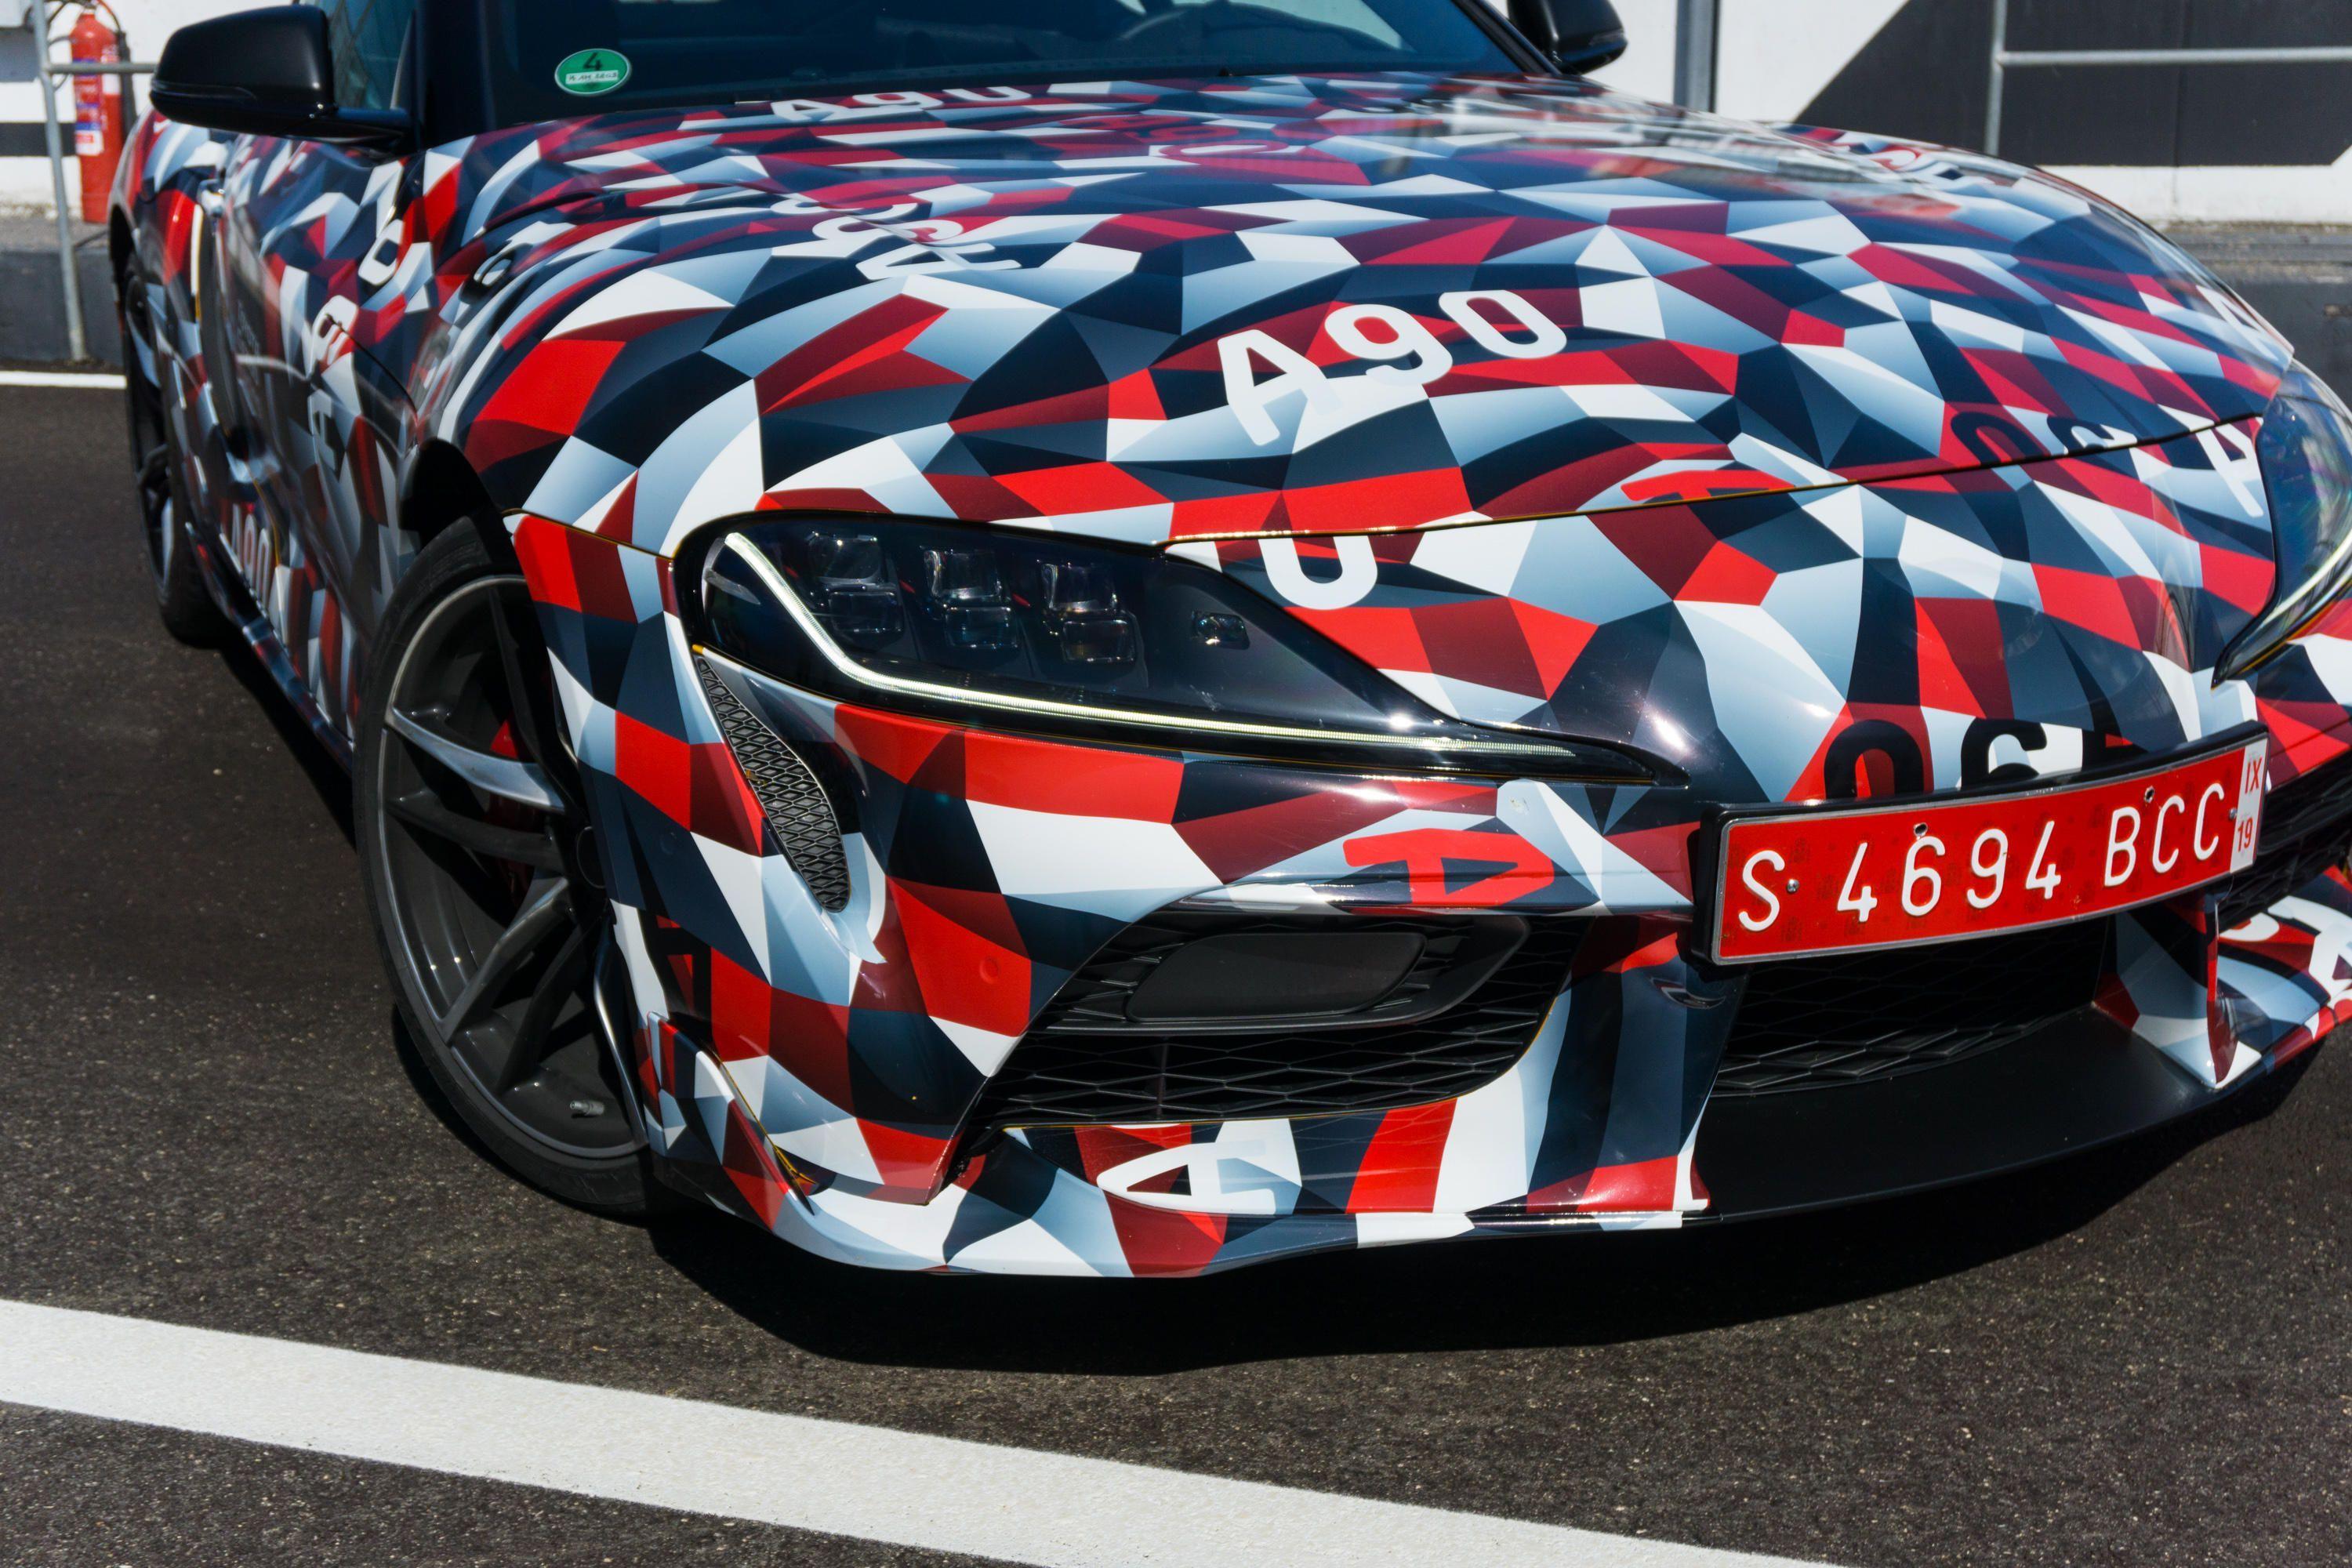 Toyota Supra: Review and news about the new 2019 Toyota Supra